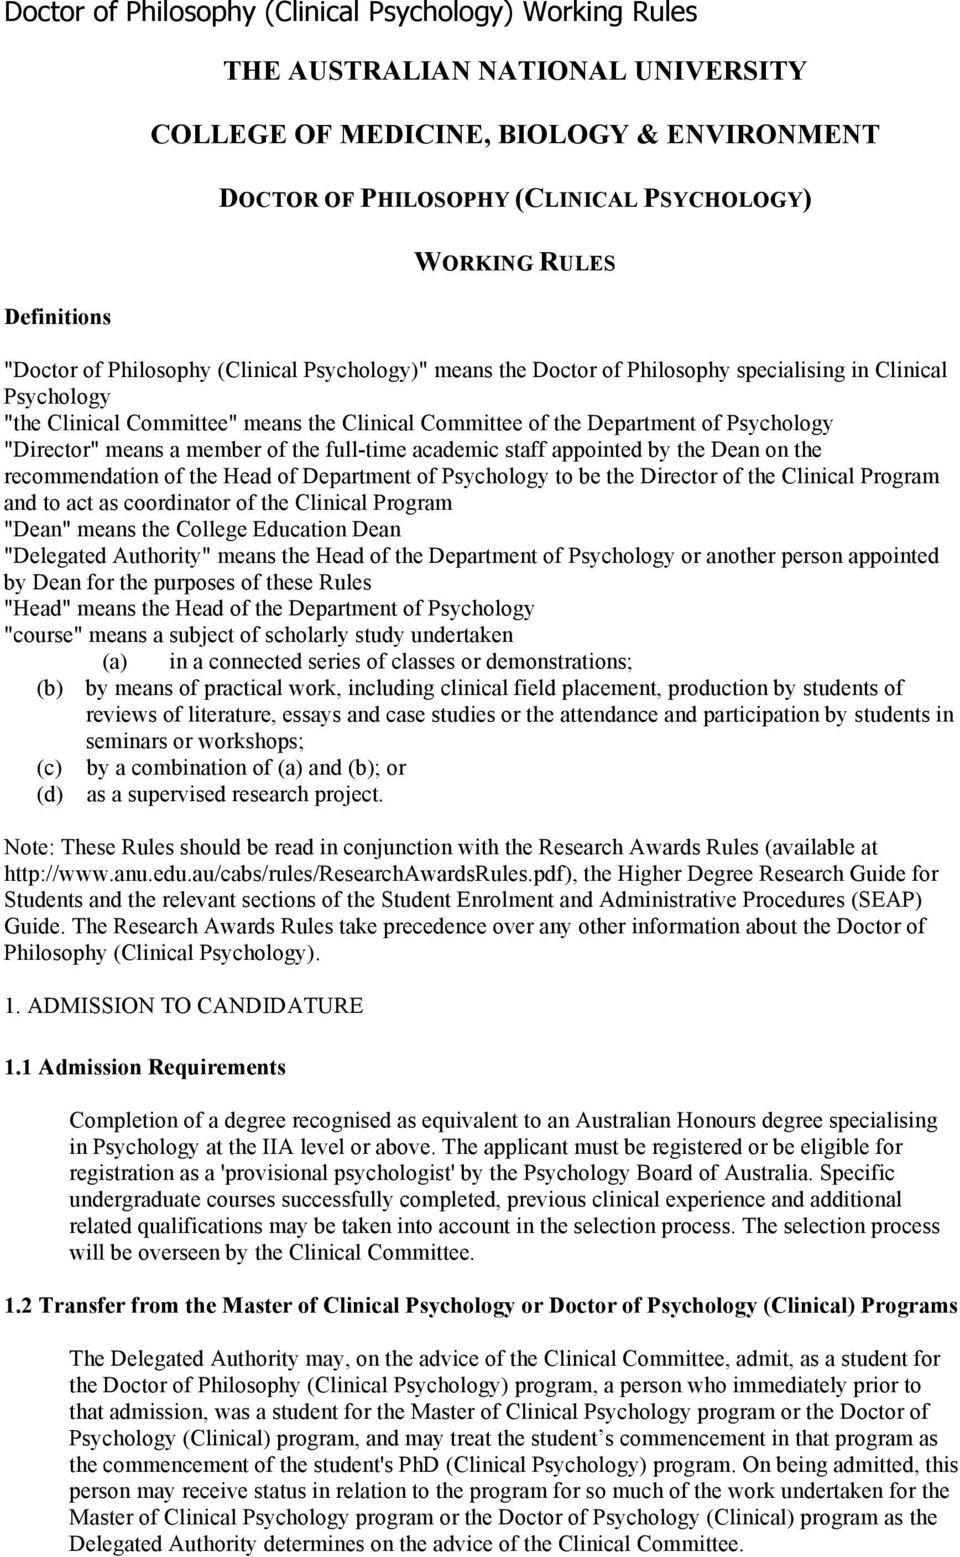 Psychology "Director" means a member of the full-time academic staff appointed by the Dean on the recommendation of the Head of Department of Psychology to be the Director of the Clinical Program and